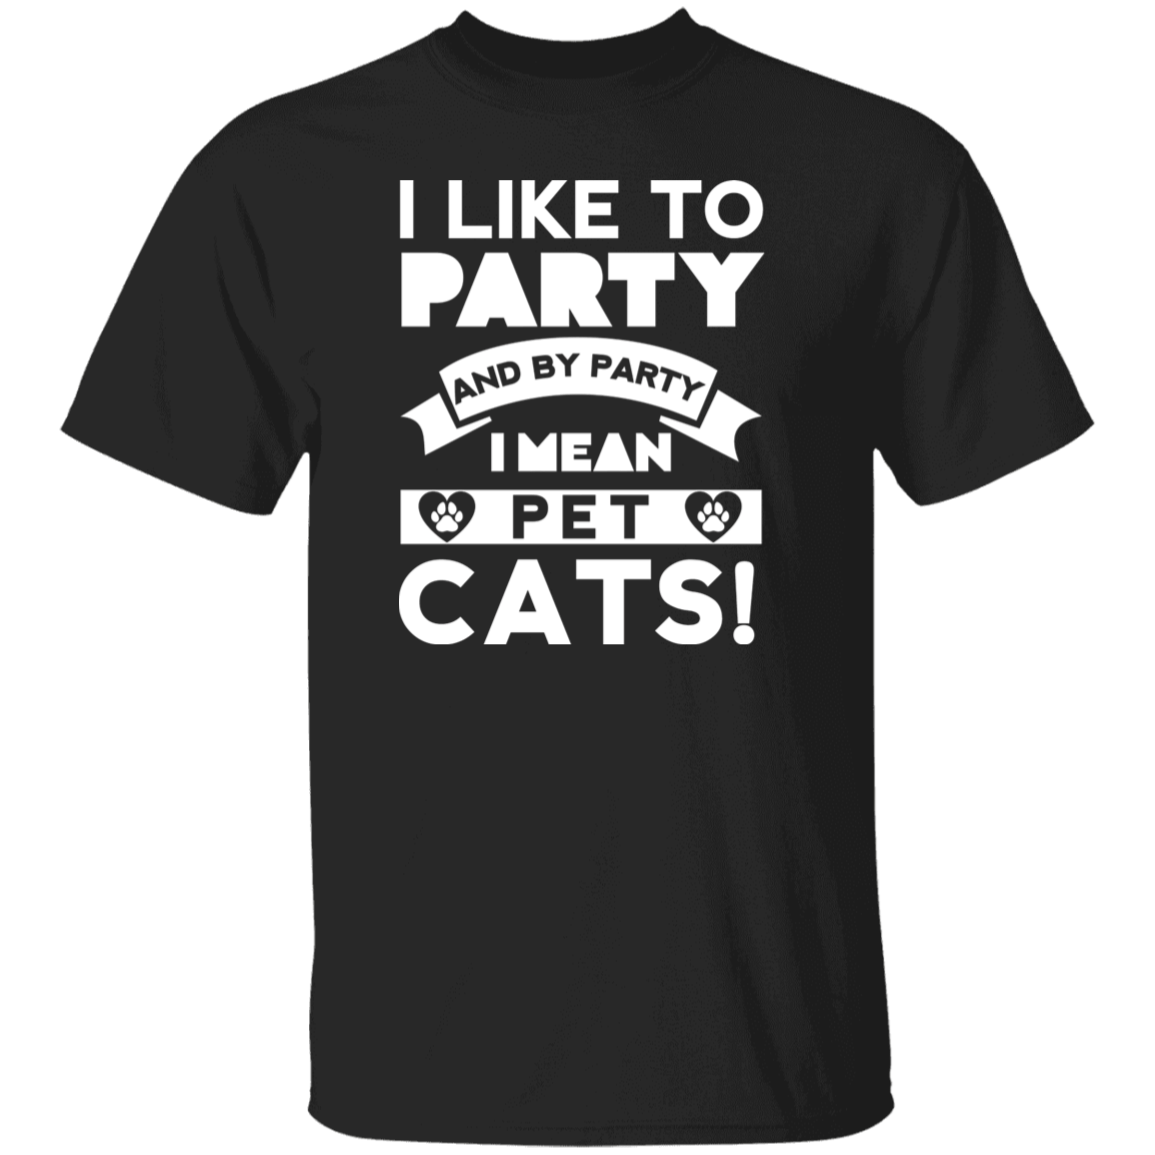 I Like To Party Cats - T Shirt.